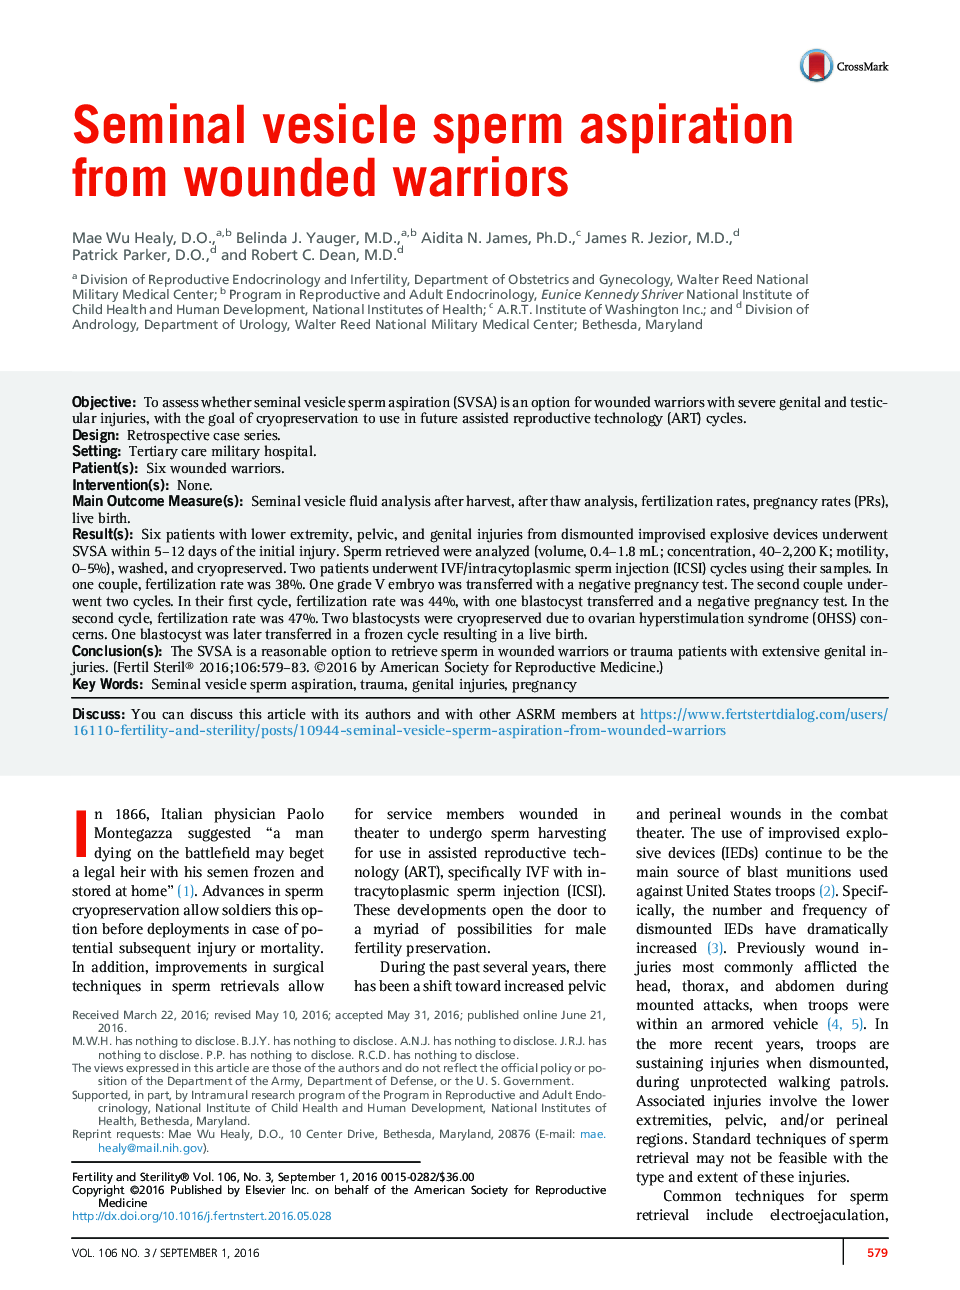 Seminal vesicle sperm aspiration from wounded warriors